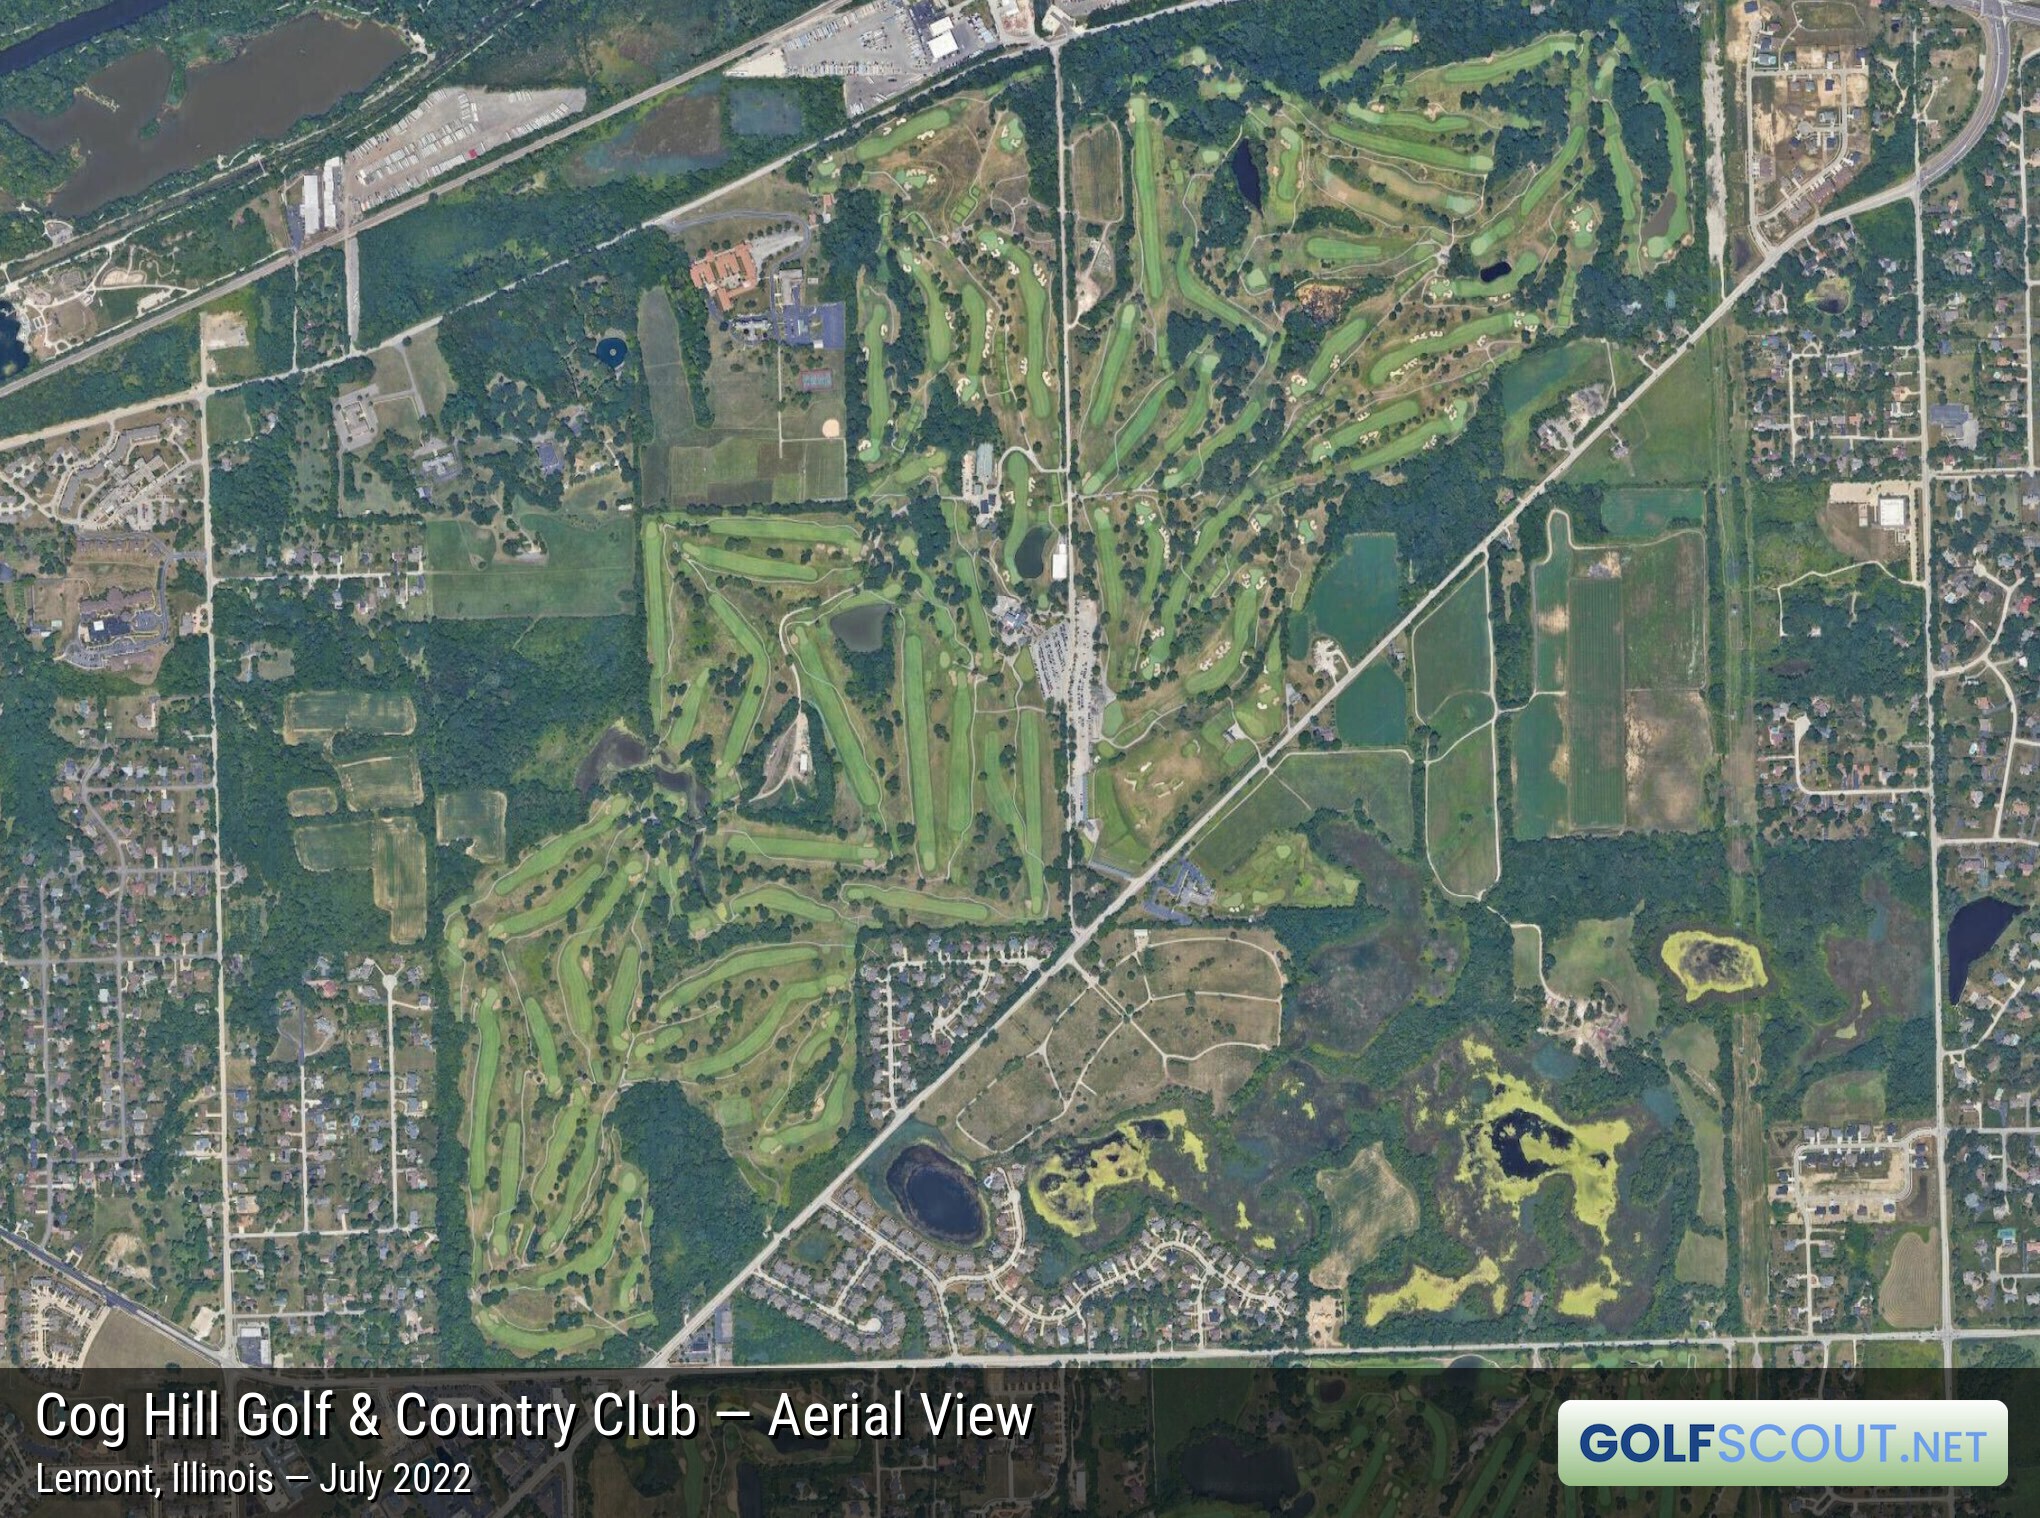 Aerial satellite imagery of Cog Hill Course #4 - Dubsdread in Lemont, Illinois. Cog Hill has 4 courses. Courses 2 and 4 are located in the northeast portion of the property. Image courtesy of Google Maps.